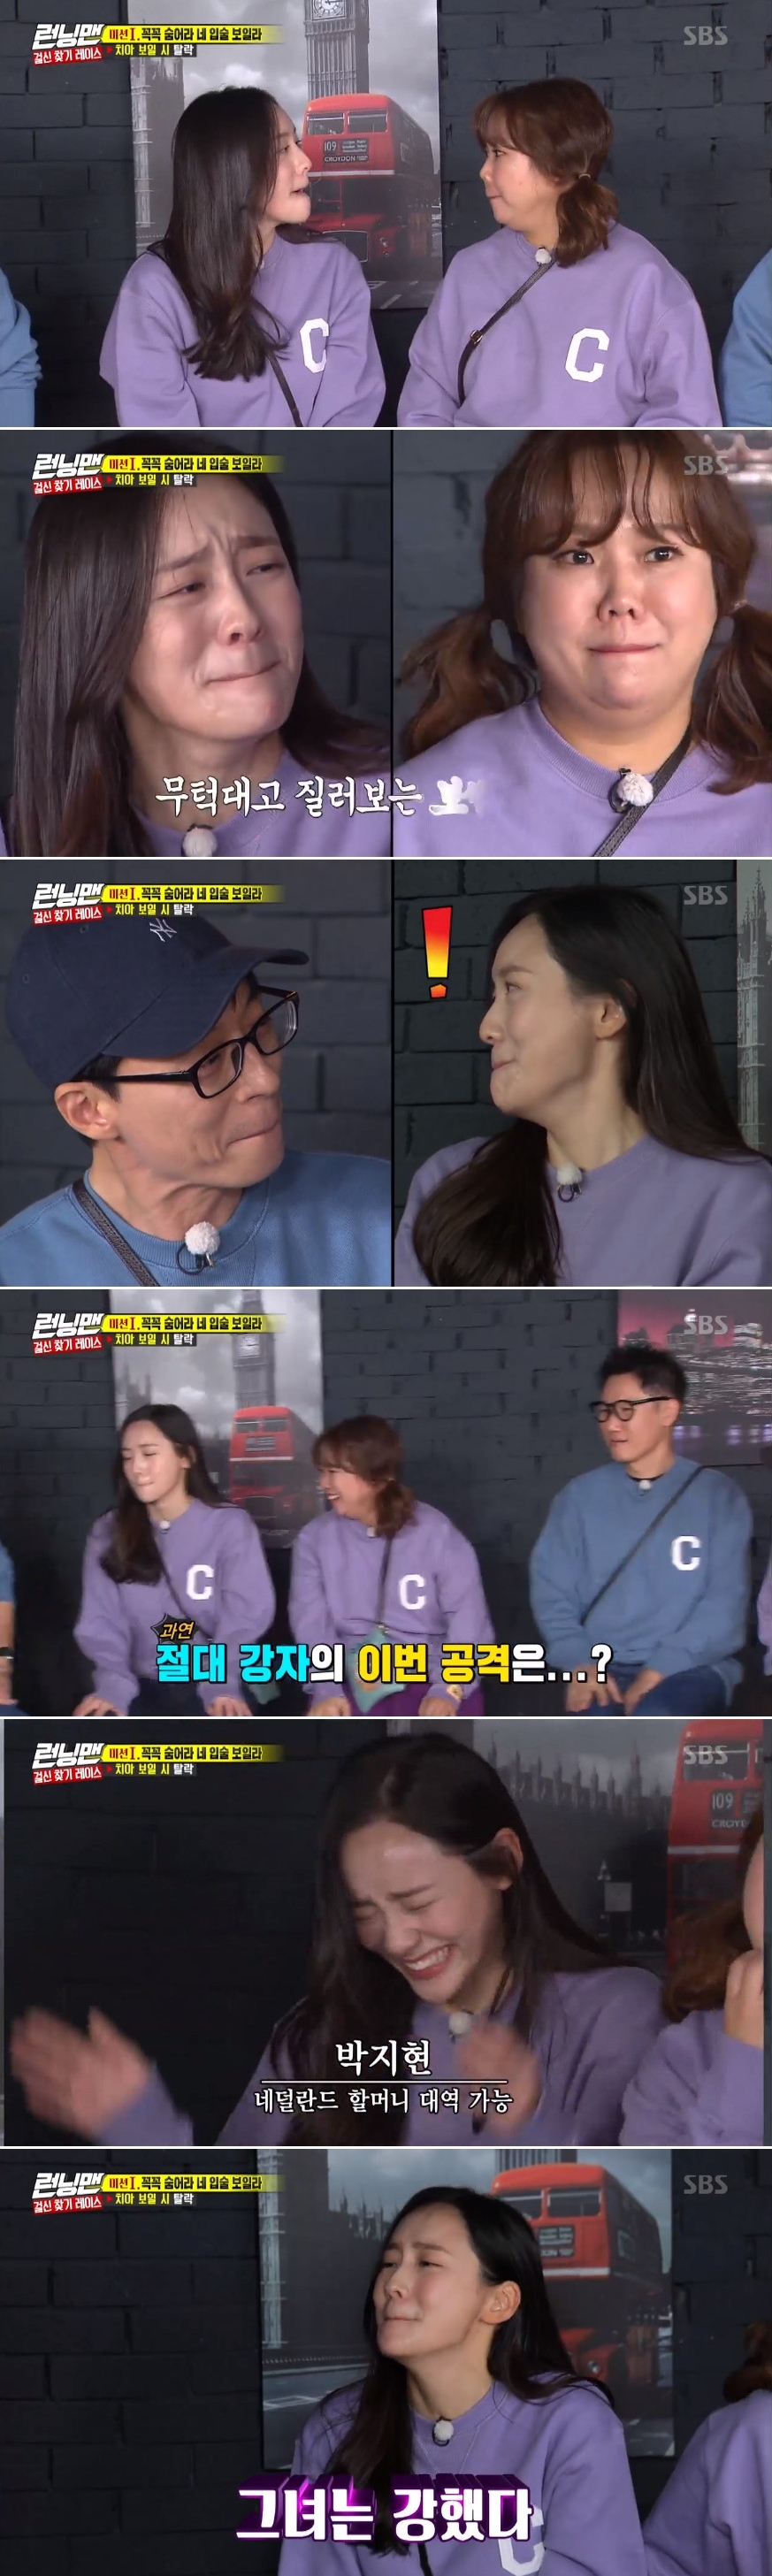 Seoul) = Actor Park Ji-hyun showed off his artistic sense in Running Man.Park Ji-hyun and comedian Hong Hyun-hee appeared as guests in the SBS entertainment program Running Man, which was broadcast on the afternoon of the 3rd, as it was unfolded as a Girl Finding Race.Before the full-scale game, Ji Suk-jin asked Park Ji-hyun, What happened? Did you come out for the movie promotion?Yoo Jae-Suk asked Park Ji-hyun, What do you think Ji Suk-jin is? Park Ji-hyun asked Ji Suk-jin, Did you not make up at all?The members laughed and said, It is a make-up for three hours.Park Ji-hyun said to Ji Suk-jin, I think you will be very smart. Hong Hyun-hee asked, It is not a generation of SAT.The members laughed with the words It is a past generation, I walked Hanyang.Park Ji-hyun said, I like fishing, and I like game. I do a bag with roll.In the ensuing tooth concealment game, Park Ji-hyun came up with the strongest Zhong You by knocking down strongman Kim Jong-kook.Yoo Jae-Suk laughed at Park Ji-hyun saying, Its like the Netherlands Grandmas Boy.Meanwhile, Lee Kwang-soo and Song Ji-hyo emerged as the most likely candidates in the process of finding two people in the Girlsin Finding Race held on the day.However, in the end, the gods were revealed to be Jeon So-min and Hong Hyun-hee, and the gods victory ended.Kim Jong-kook and Lee Kwang-soo, who were named the final penalties for the game, carried out the car wash penalty.